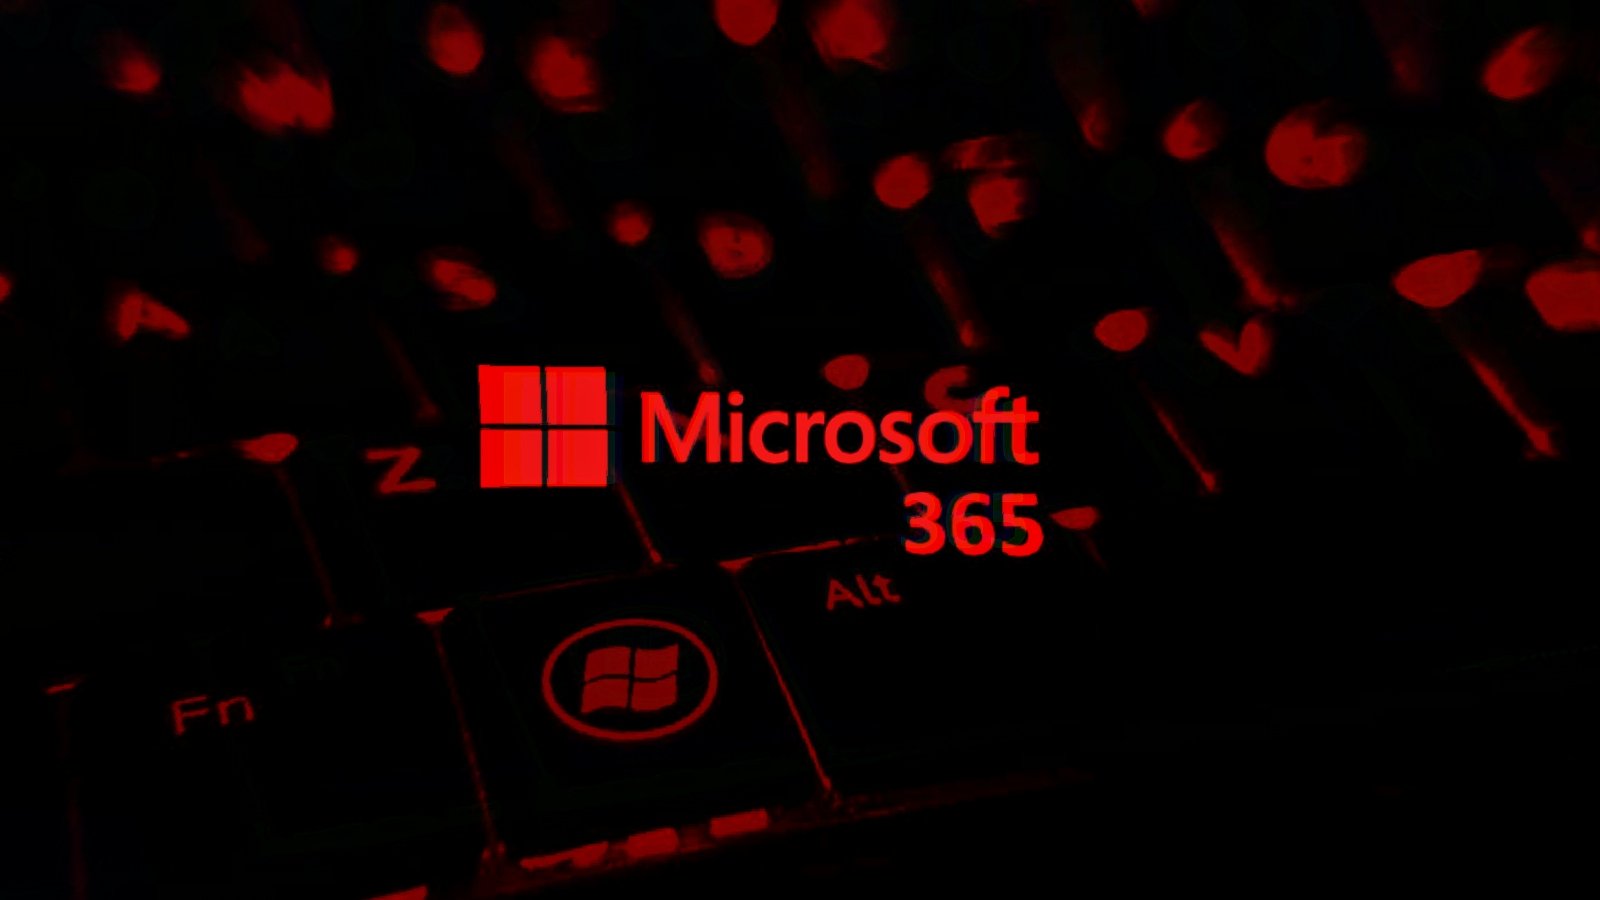 EvilProxy phishing campaign targets 120,000 Microsoft 365 users